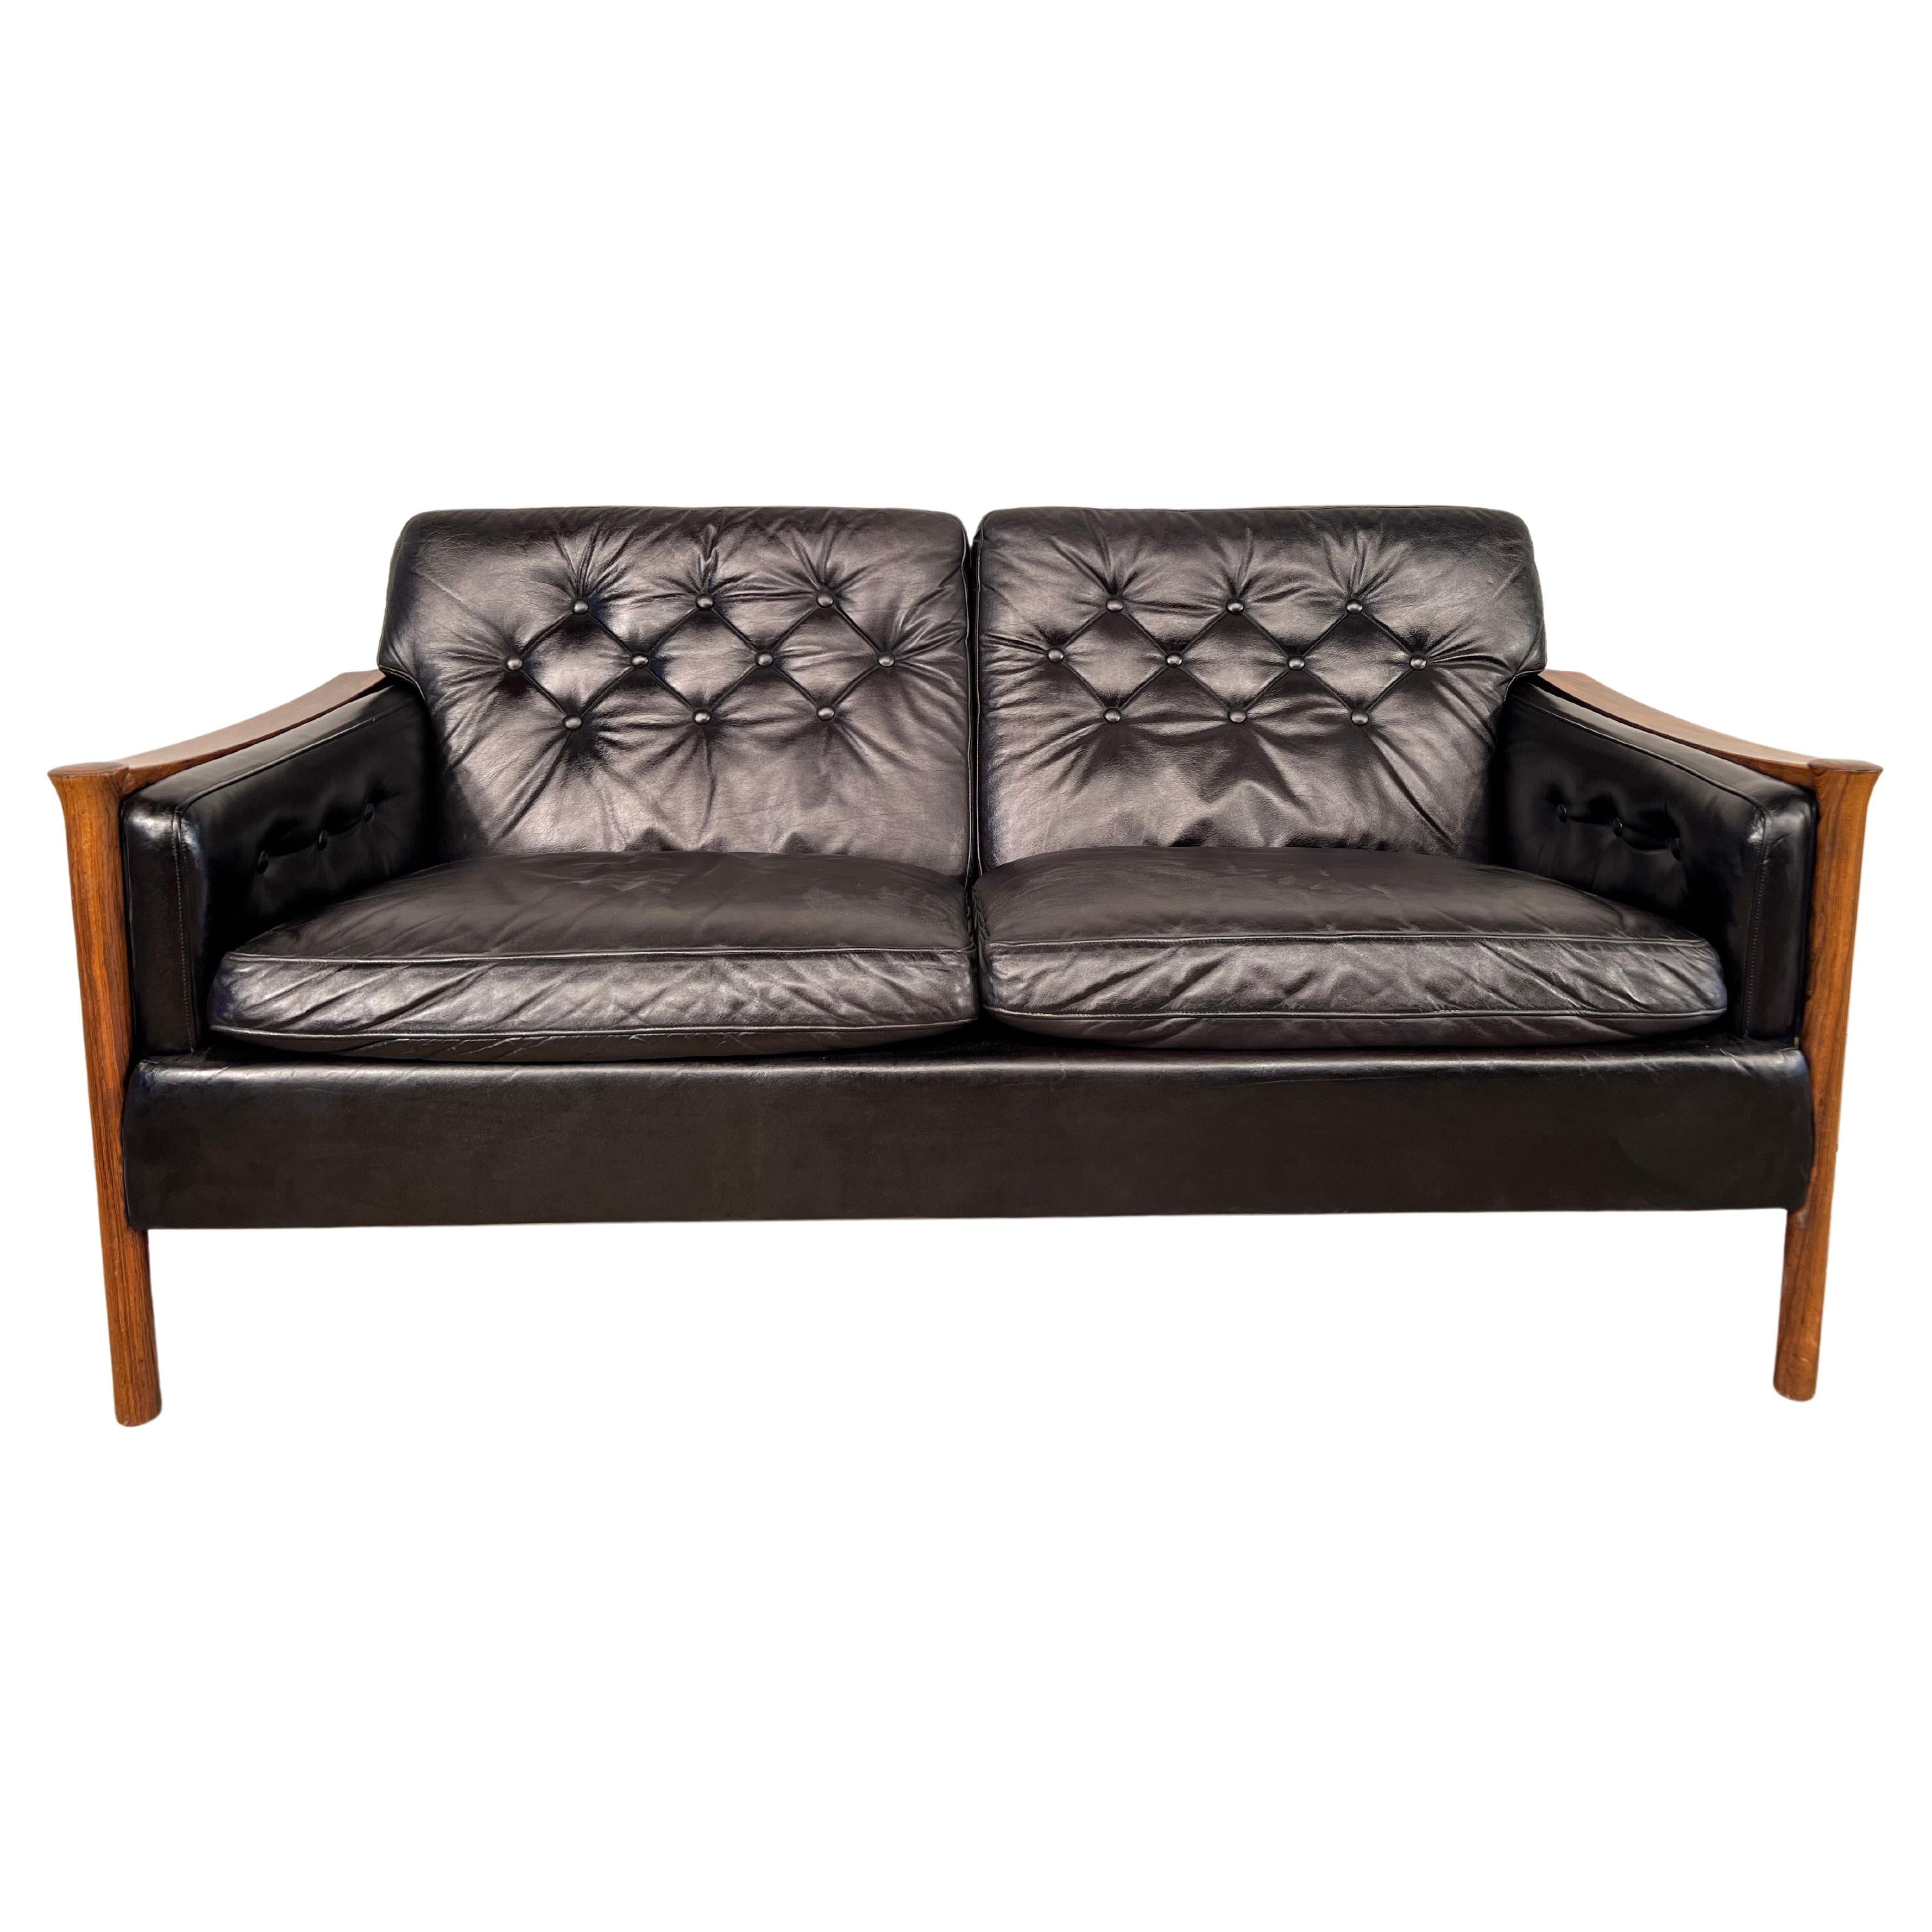 V Neat Two Seater Sofa in Leather by Torbjørn Afdal for Bruksbo Norway 70s #515 For Sale